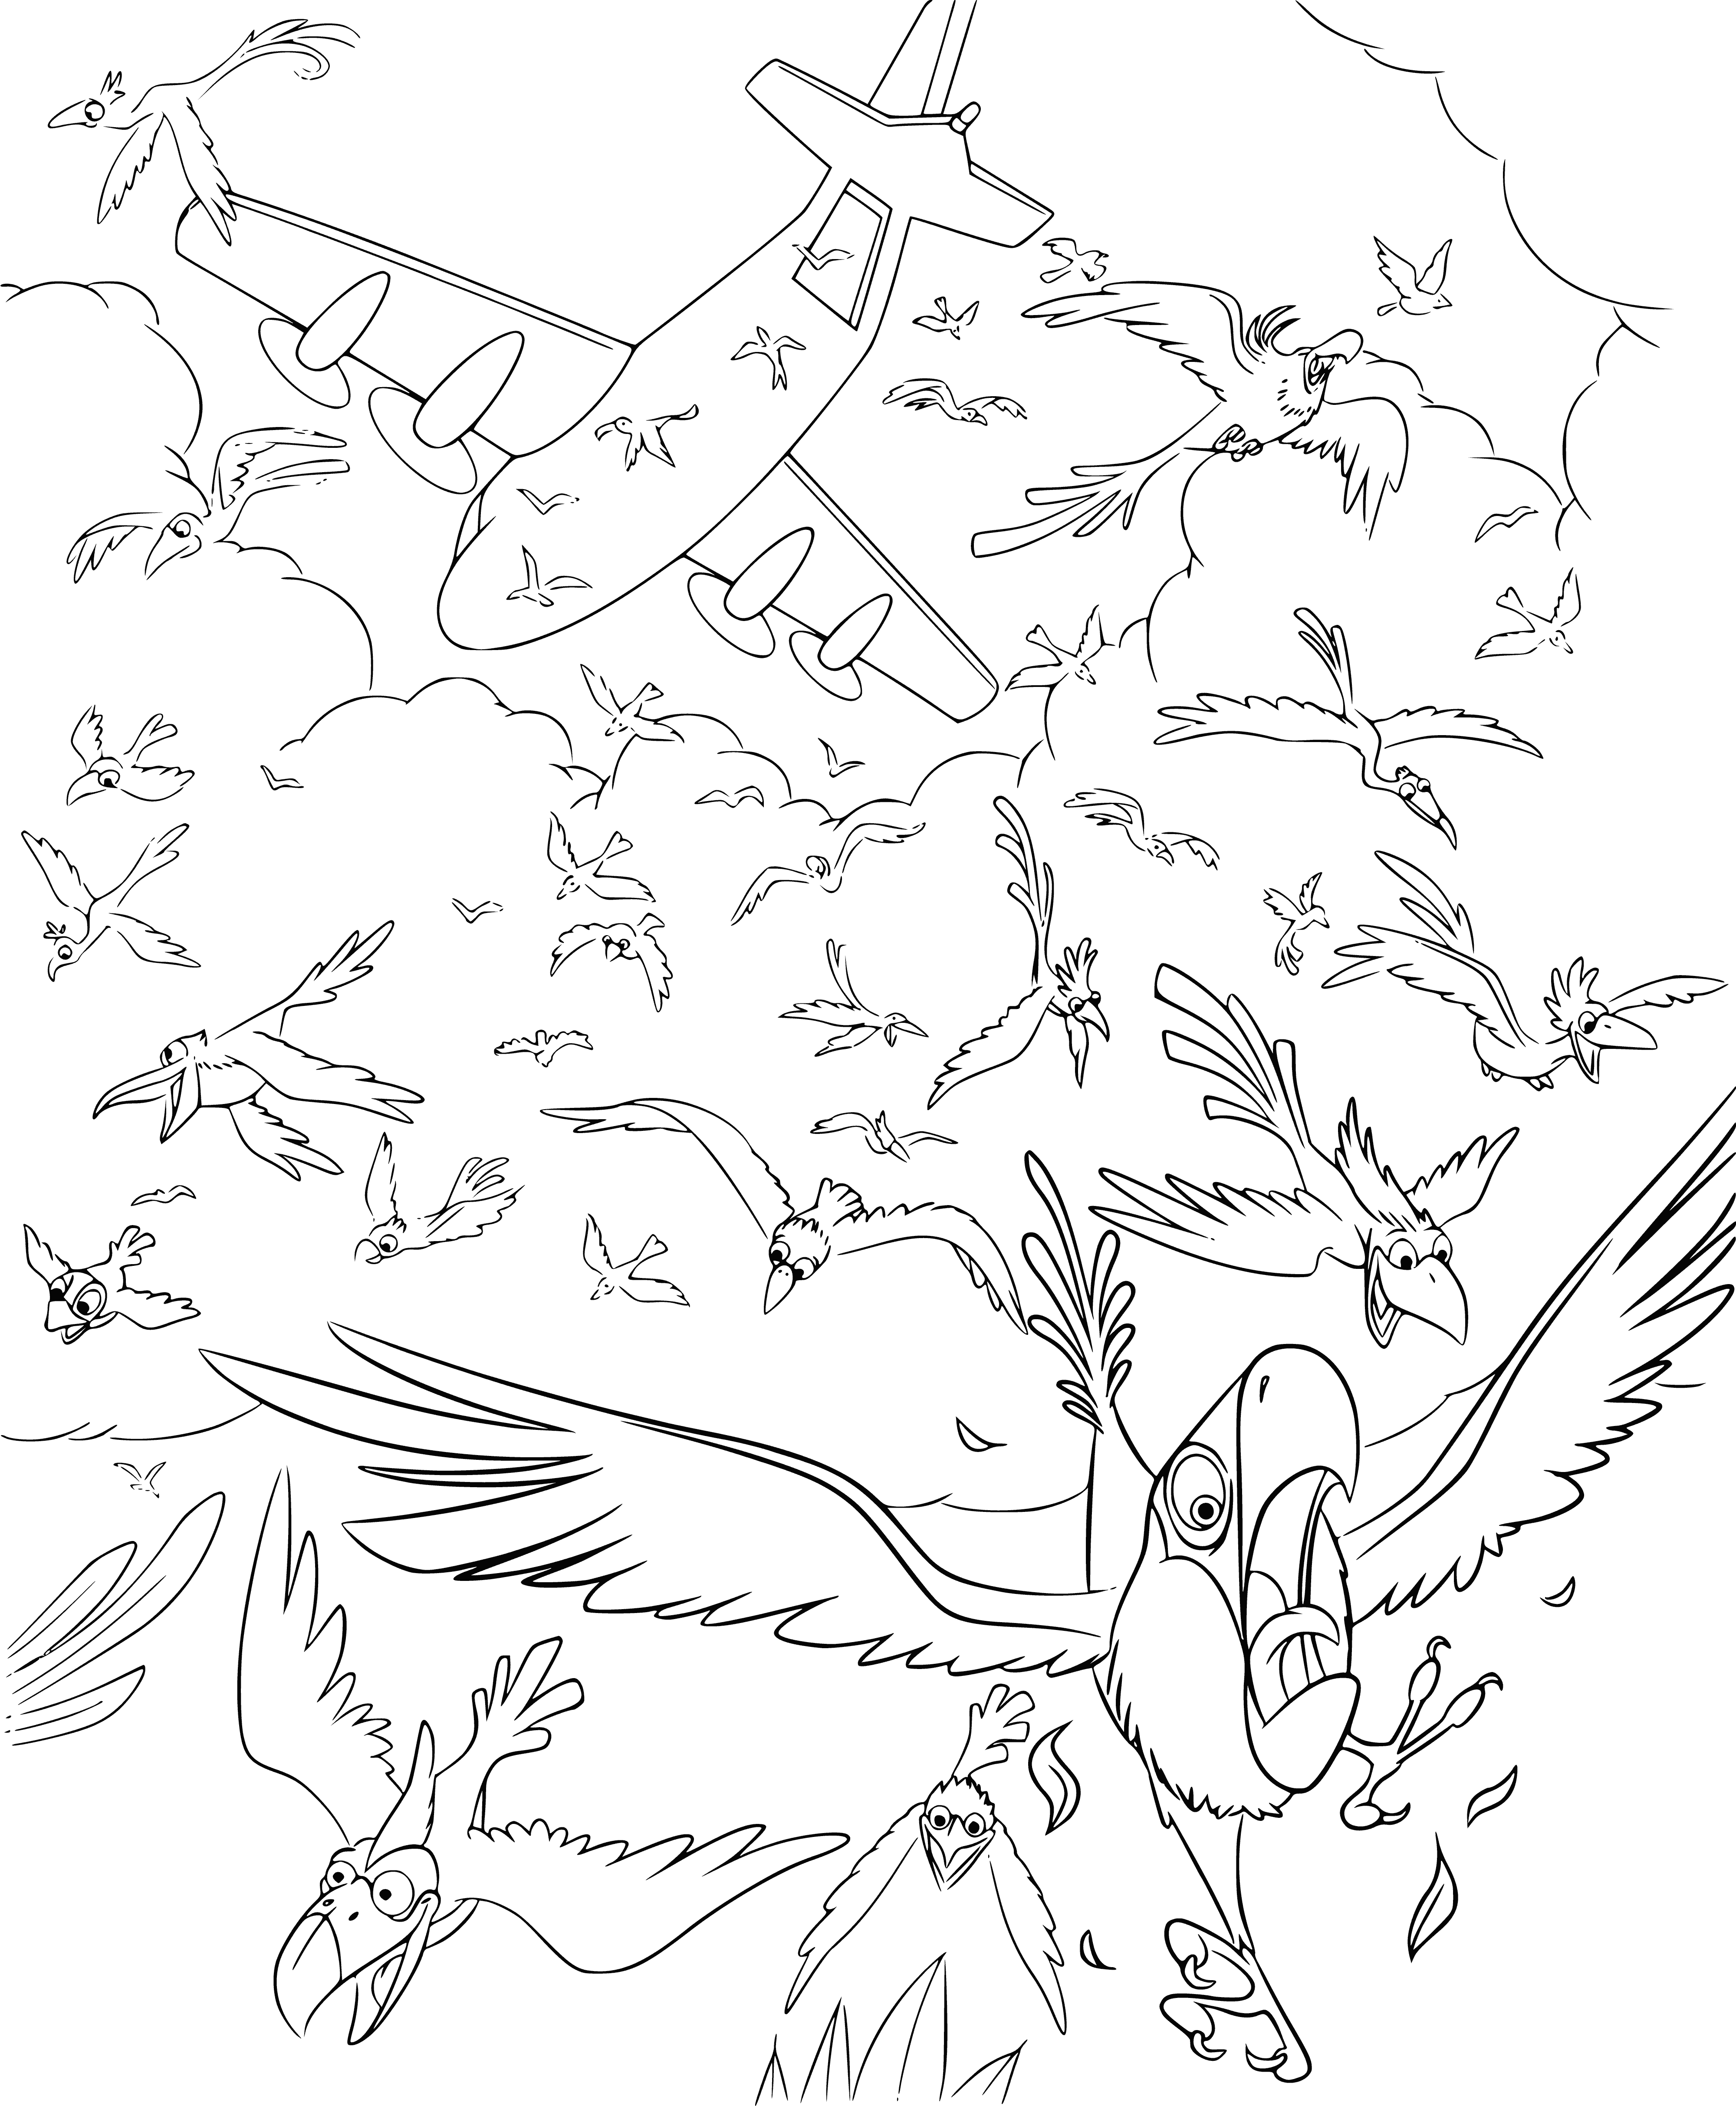 Flying from a height coloring page